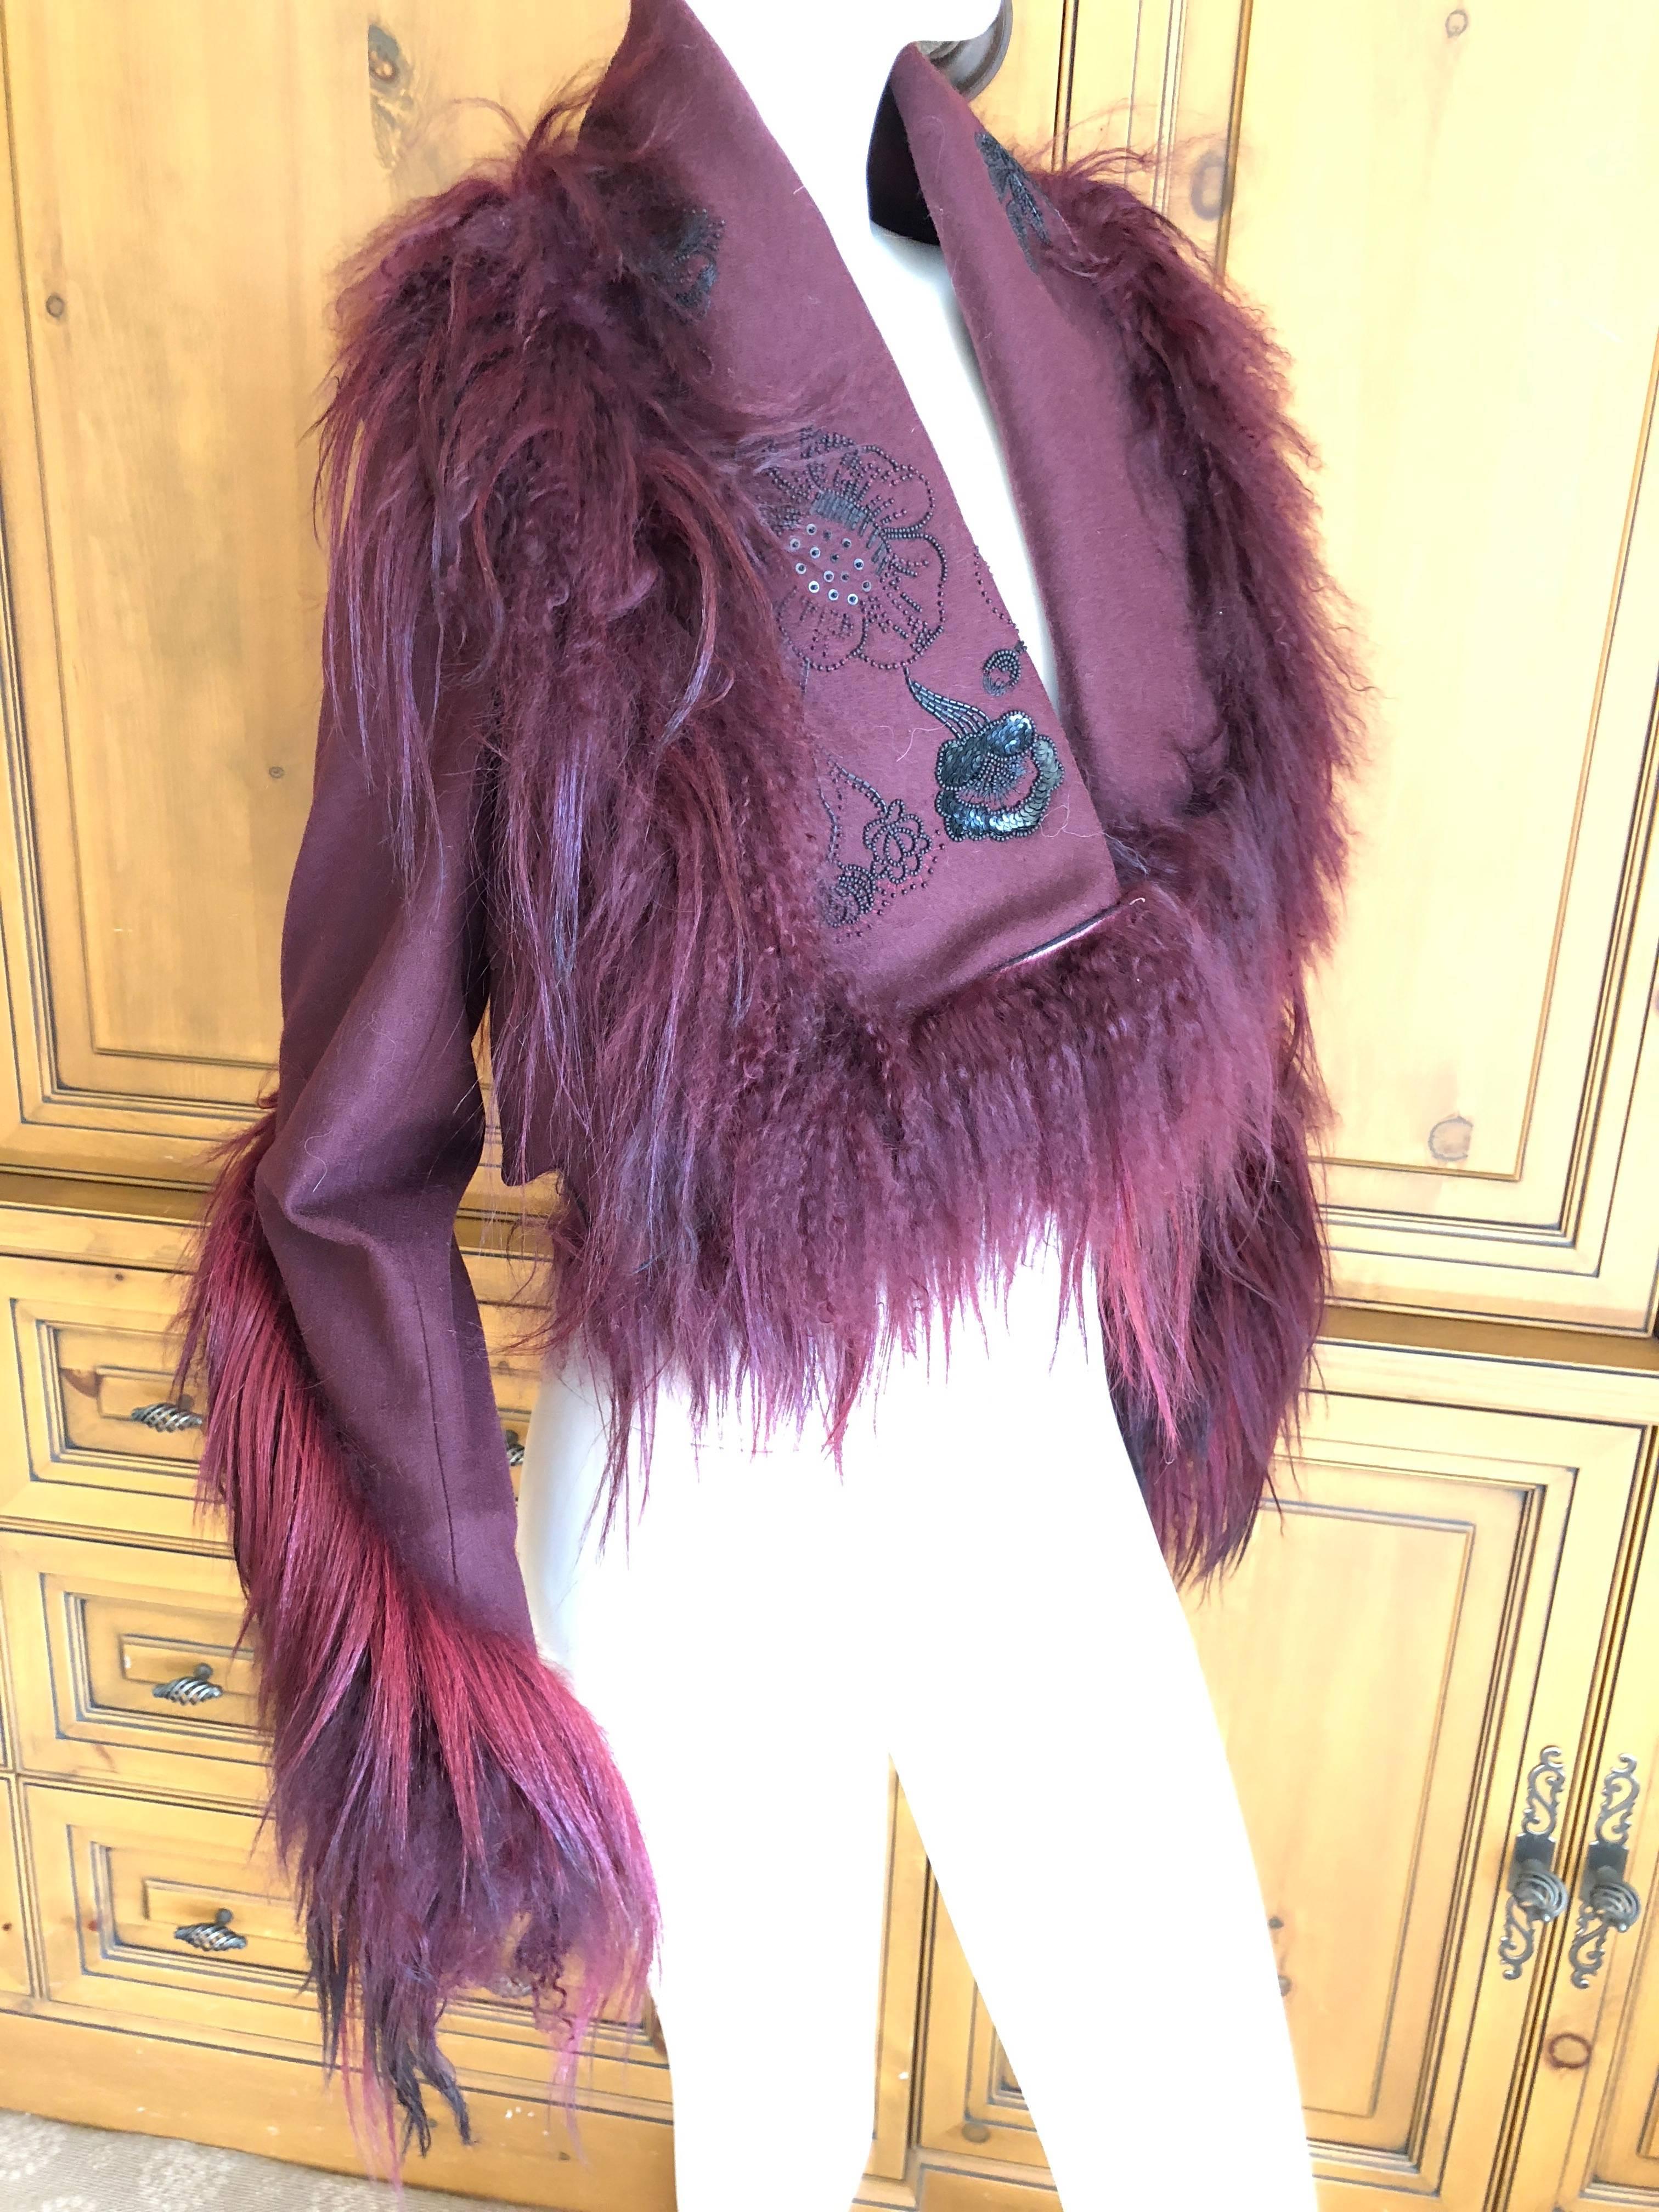 Christian Dior by John Galliano Dramatic Cropped Fur Trim Embellished Jacket .
Hard to photograph, this is stunning, with floral bead and sequin embellishment.
Long goat hair fringe has an ombre treatment.
Size 40
Bust 36"
Length